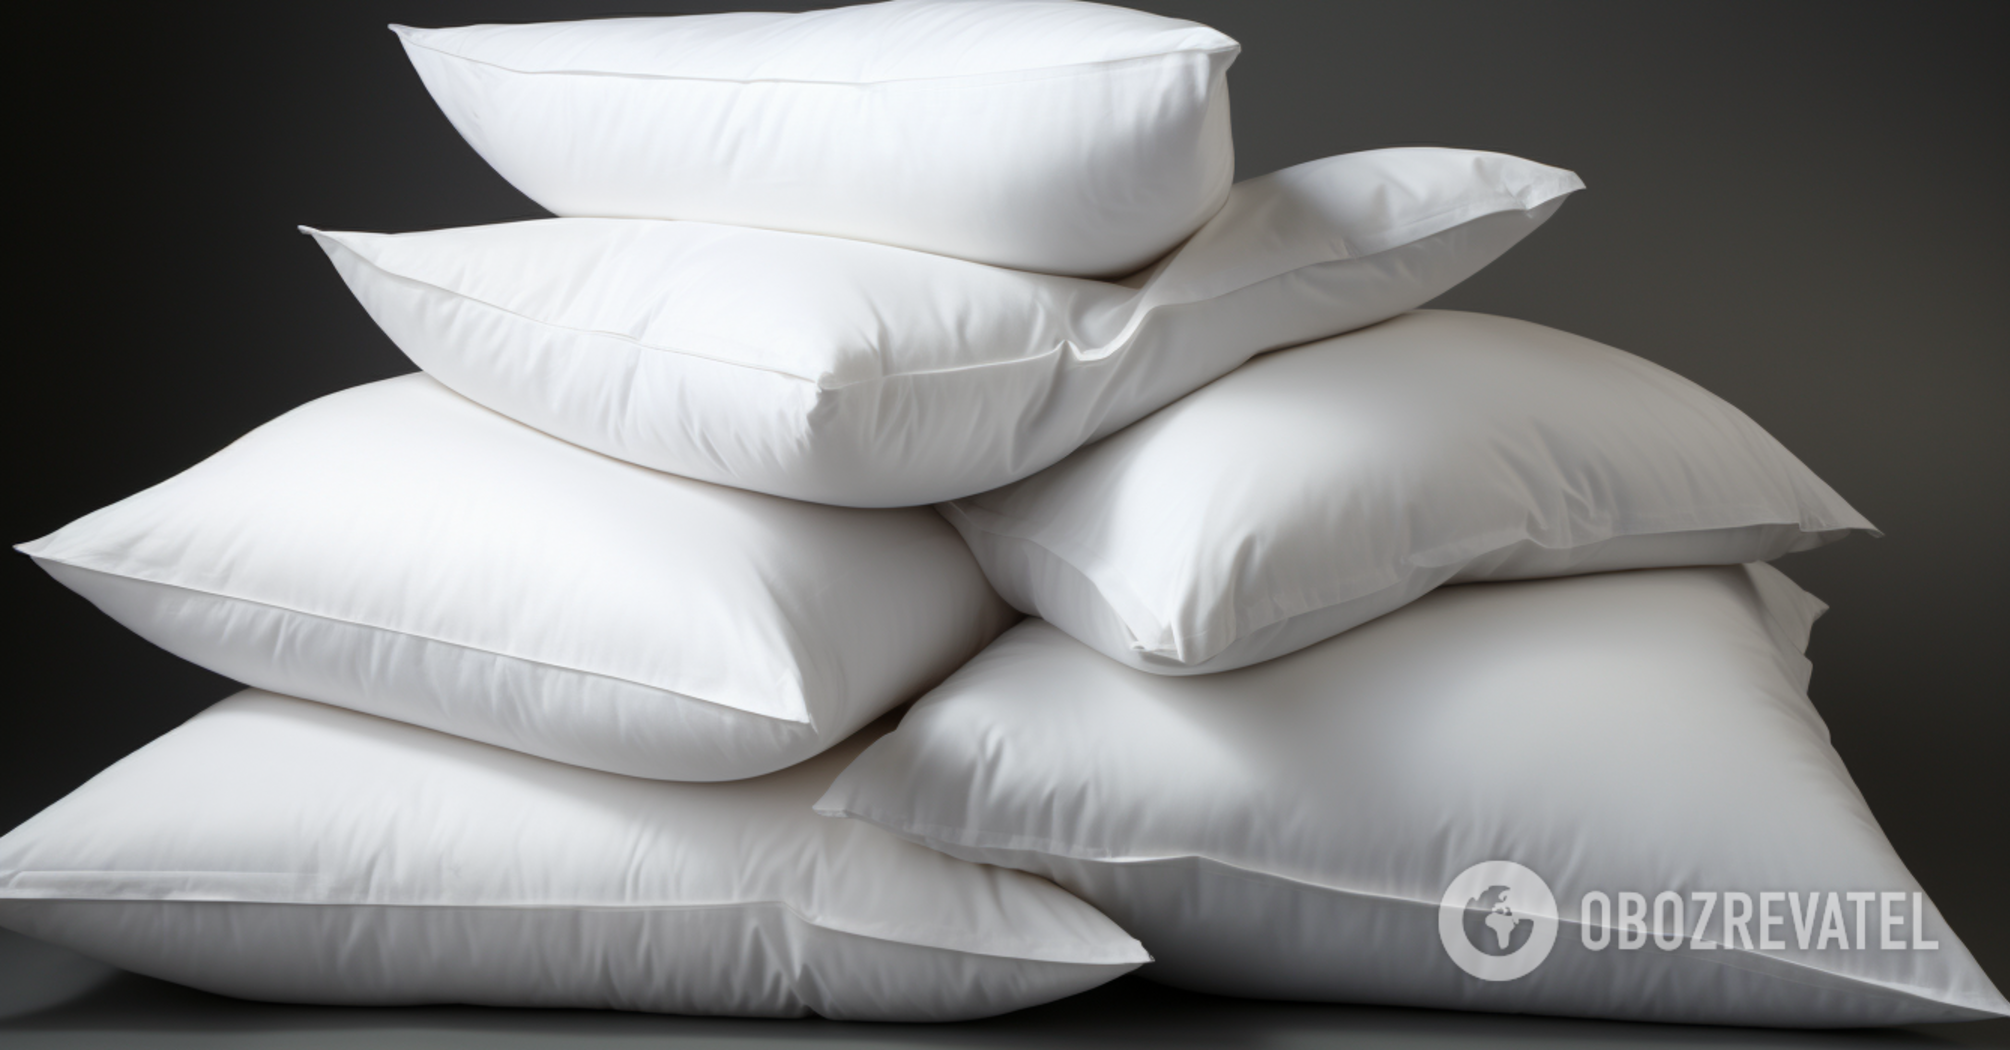 It's probably time: how often should you change your pillows